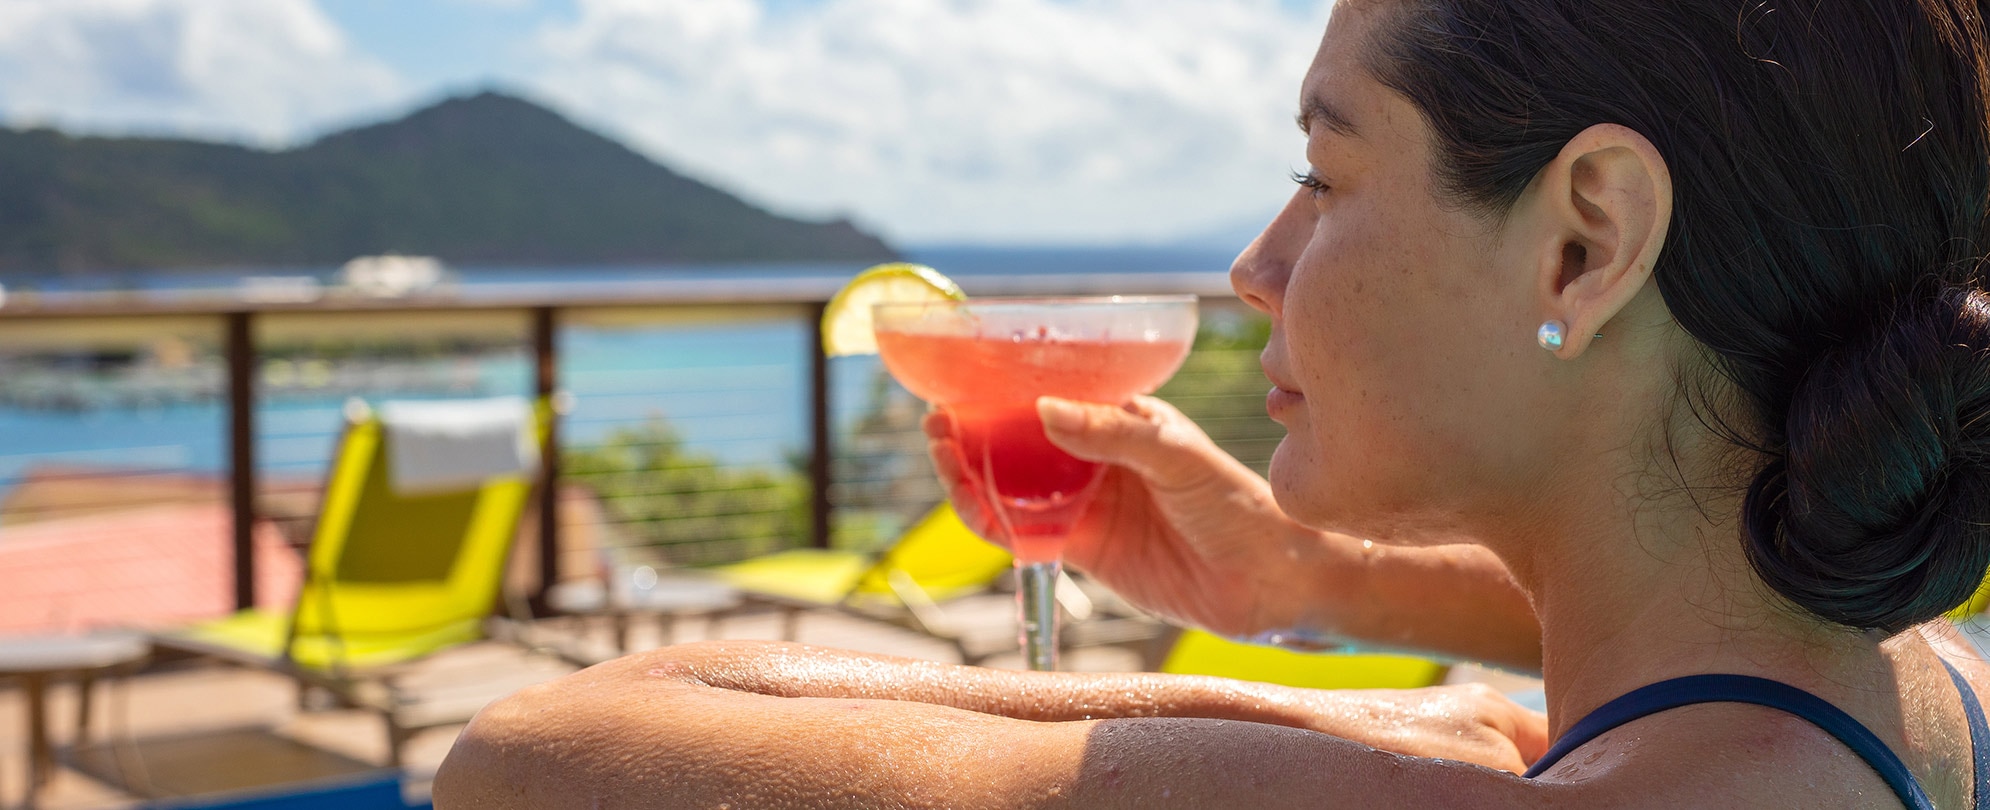 A woman looking at the view of the ocean as she enjoys a Margarita in hand.  